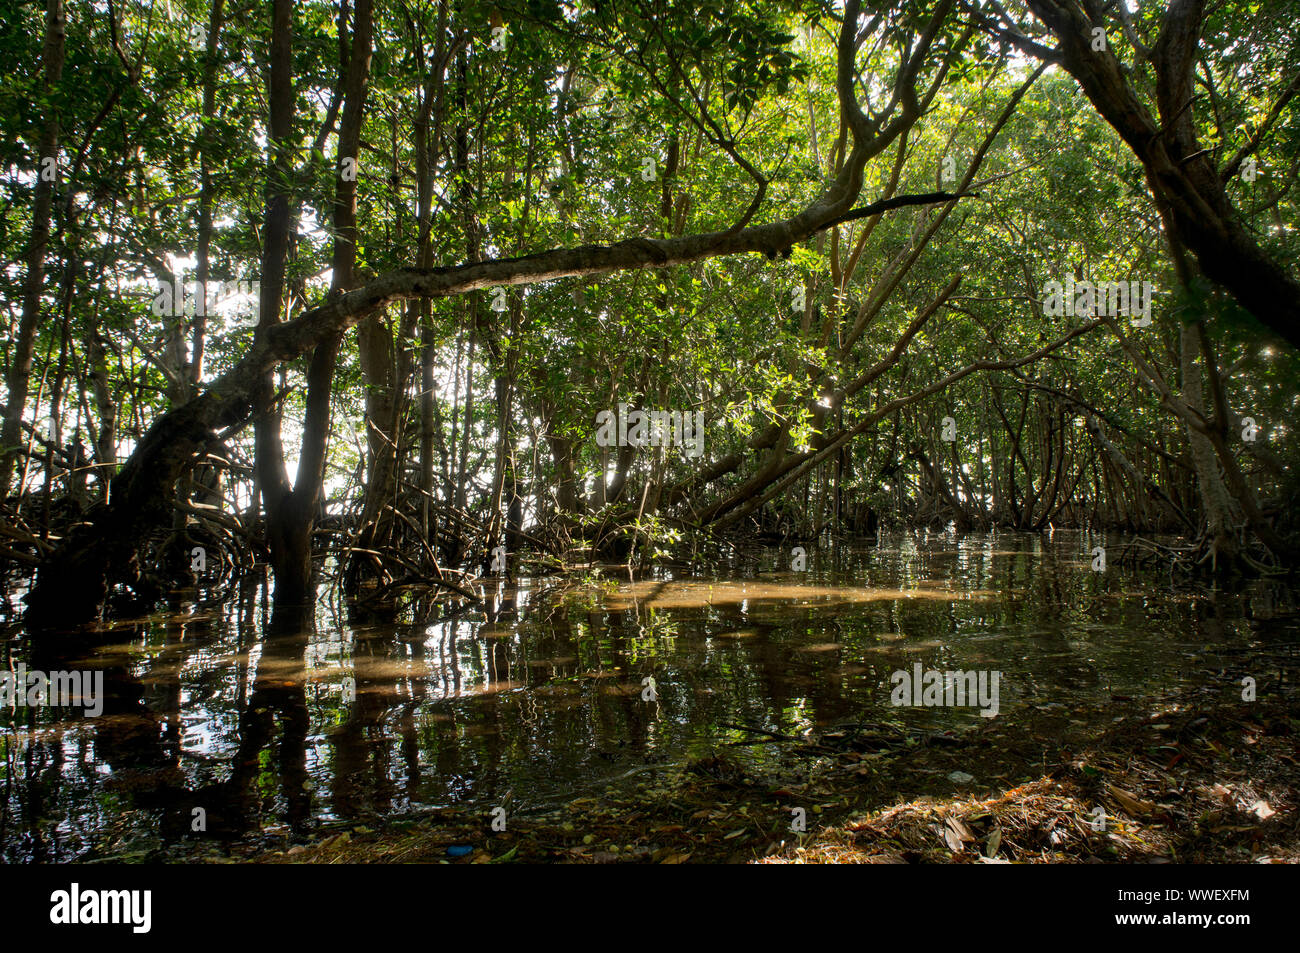 View of mangrove forest located in the Matheson Hammock Miami-Dade county park on the shores of Biscayne Bay in Miami, Florida, USA Stock Photo